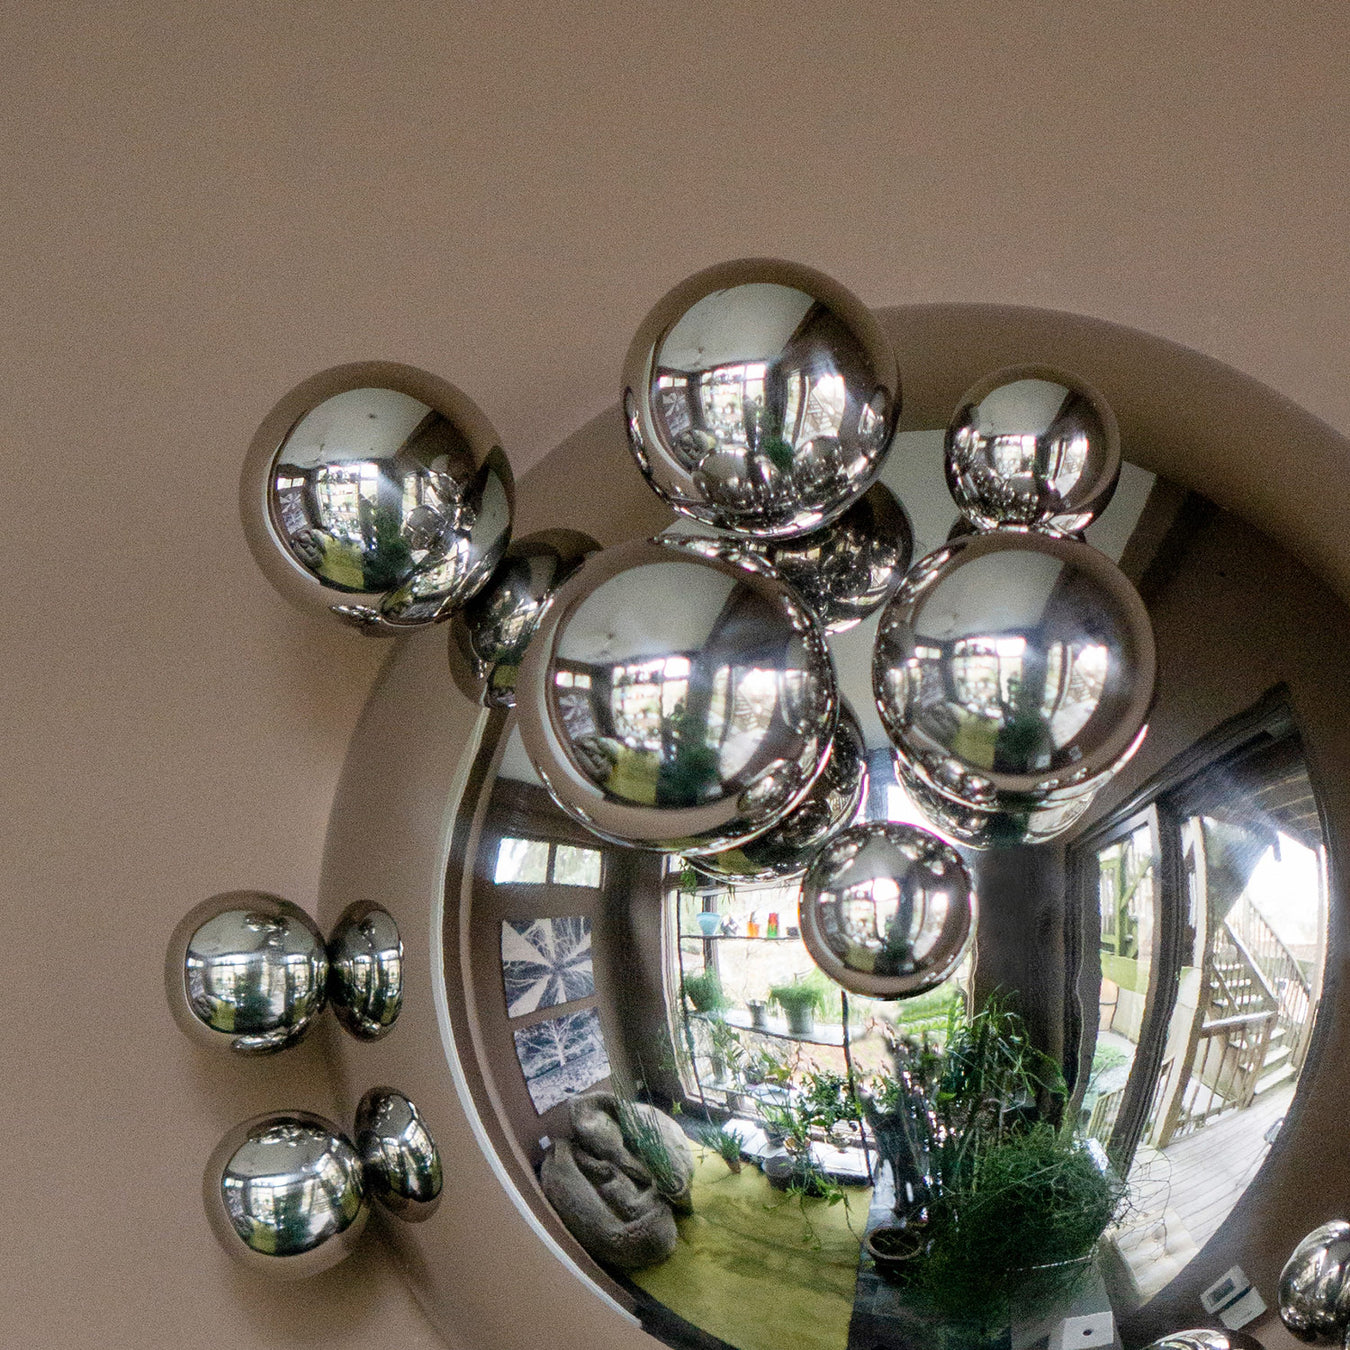 Close up of silver wall sculpture with orbs on it.